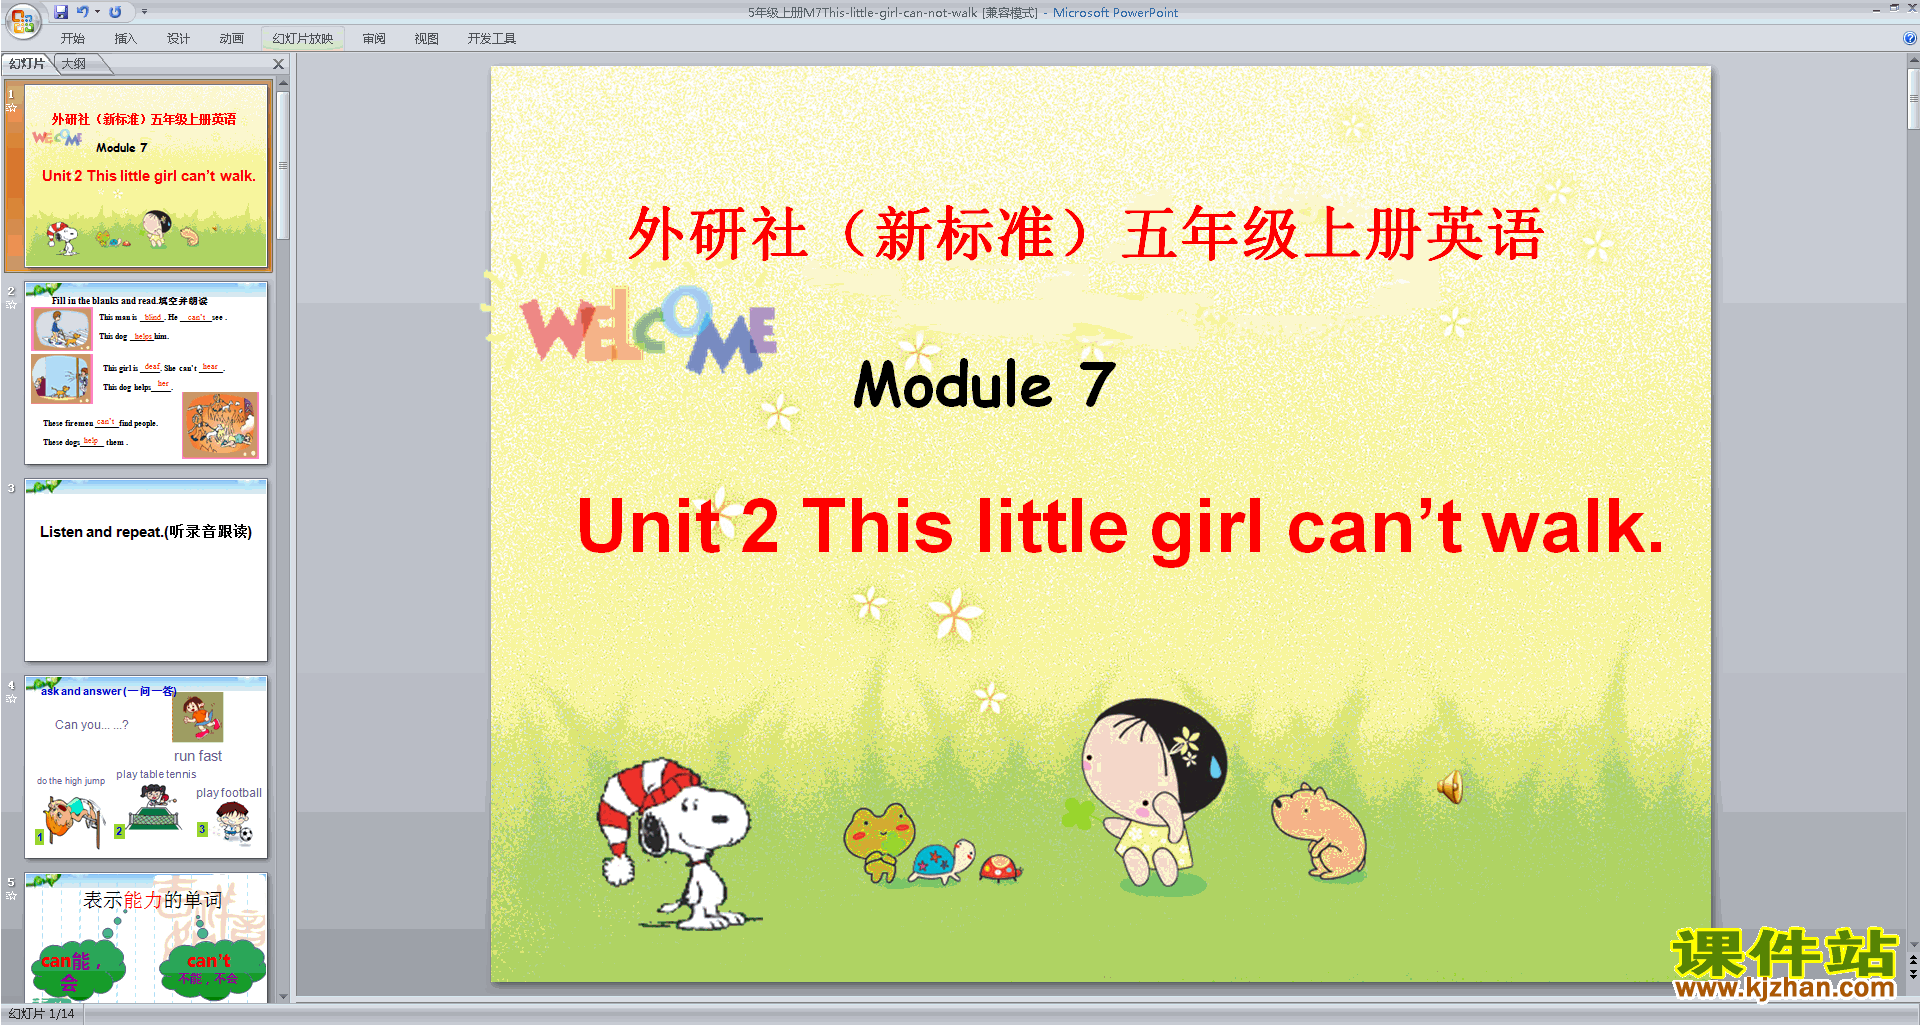 Module7 Unit2 This little girl can